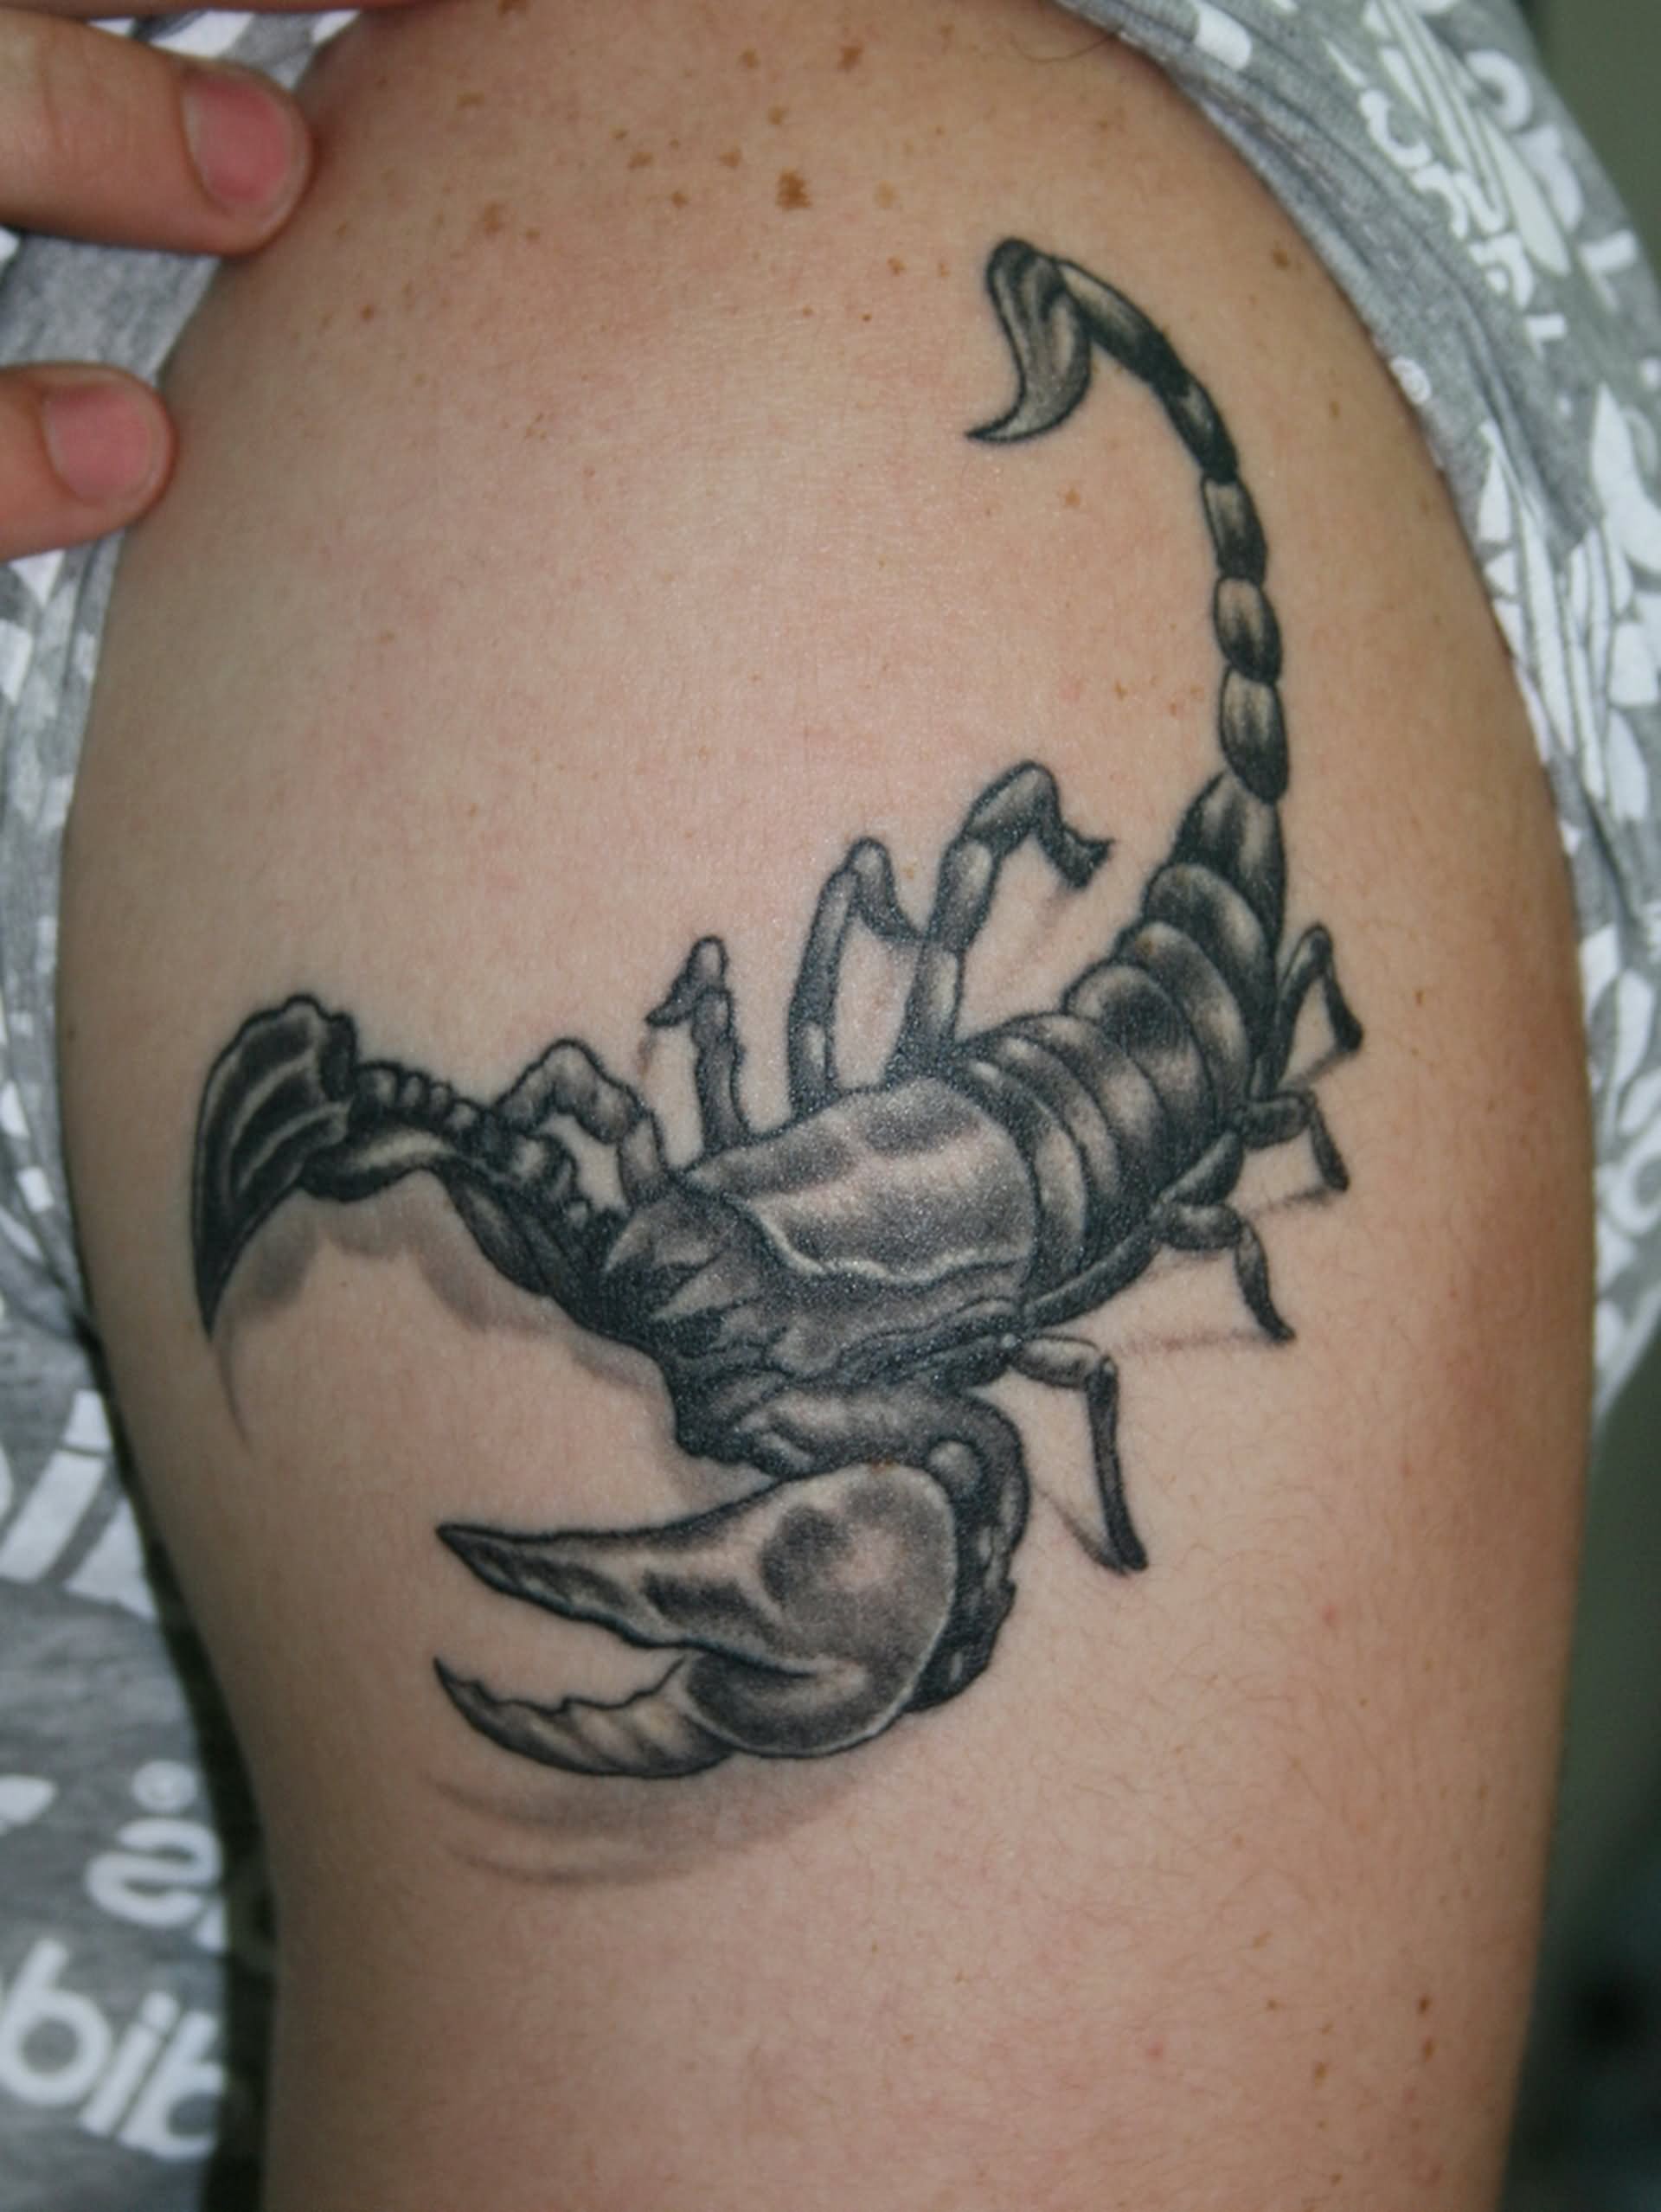 Cool Black And Grey 3D Scorpion Tattoo Design For Shoulder